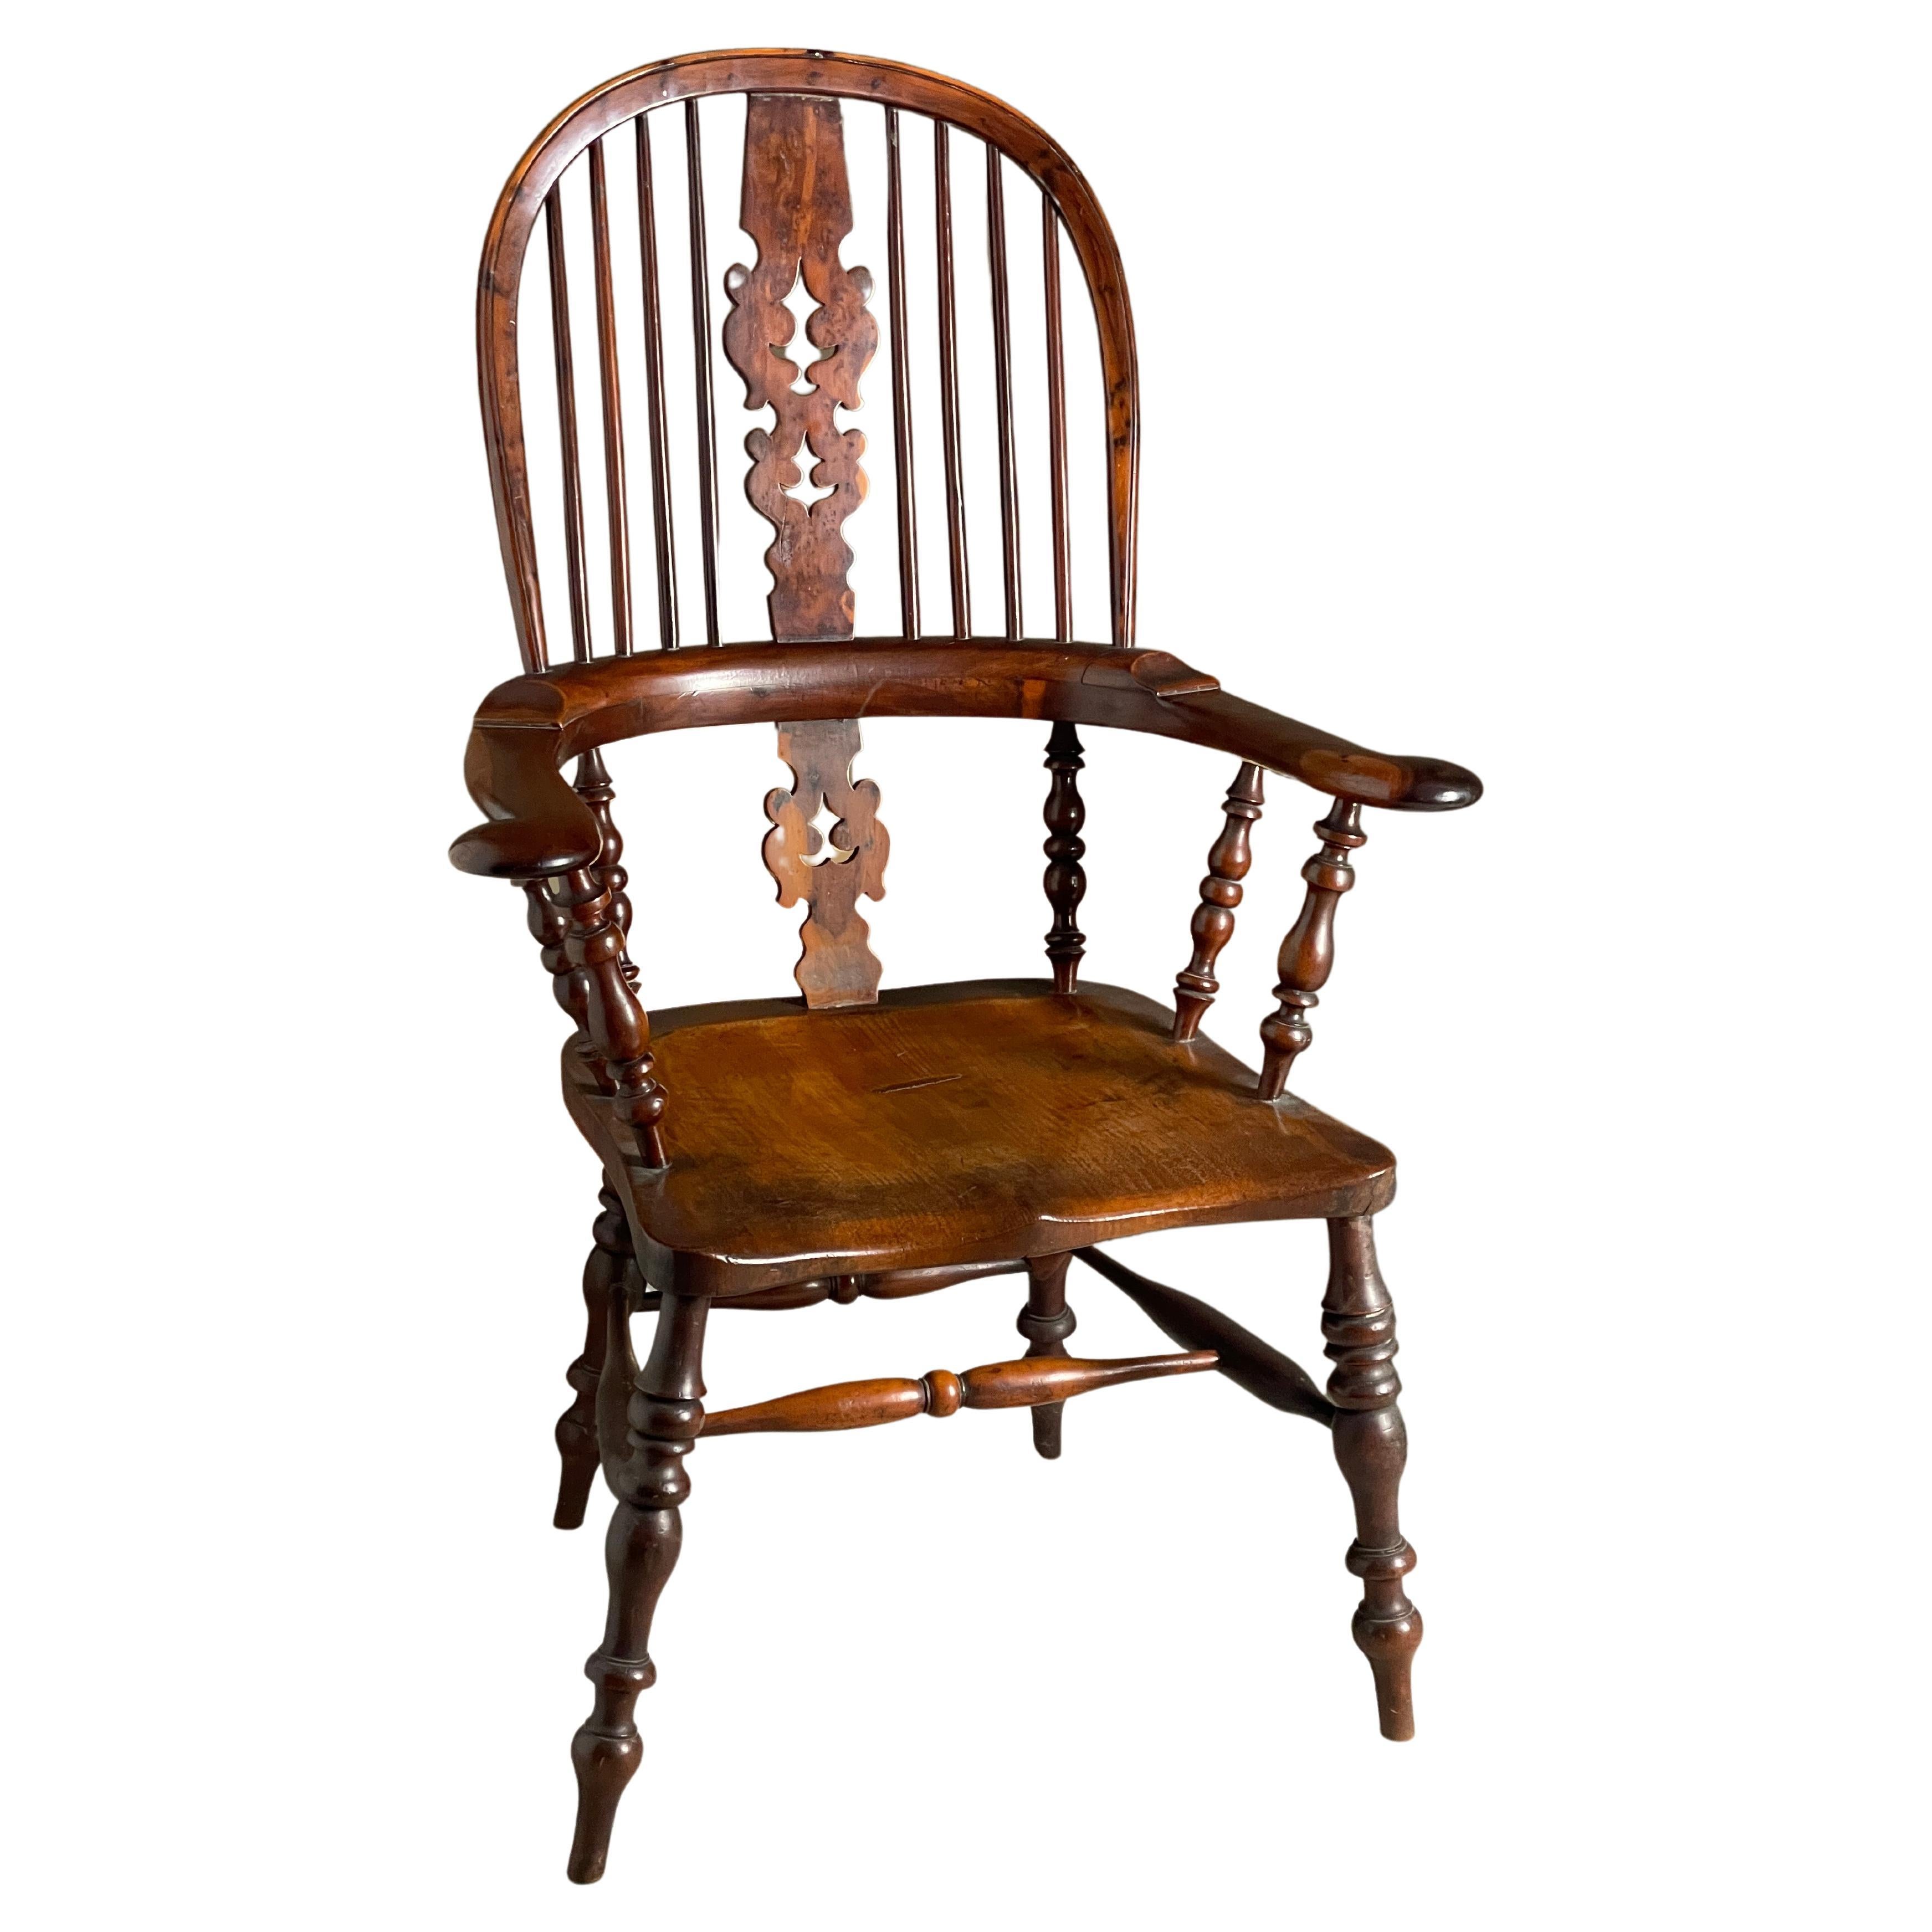 Large and beautiful yew wood Windsor chair c1850